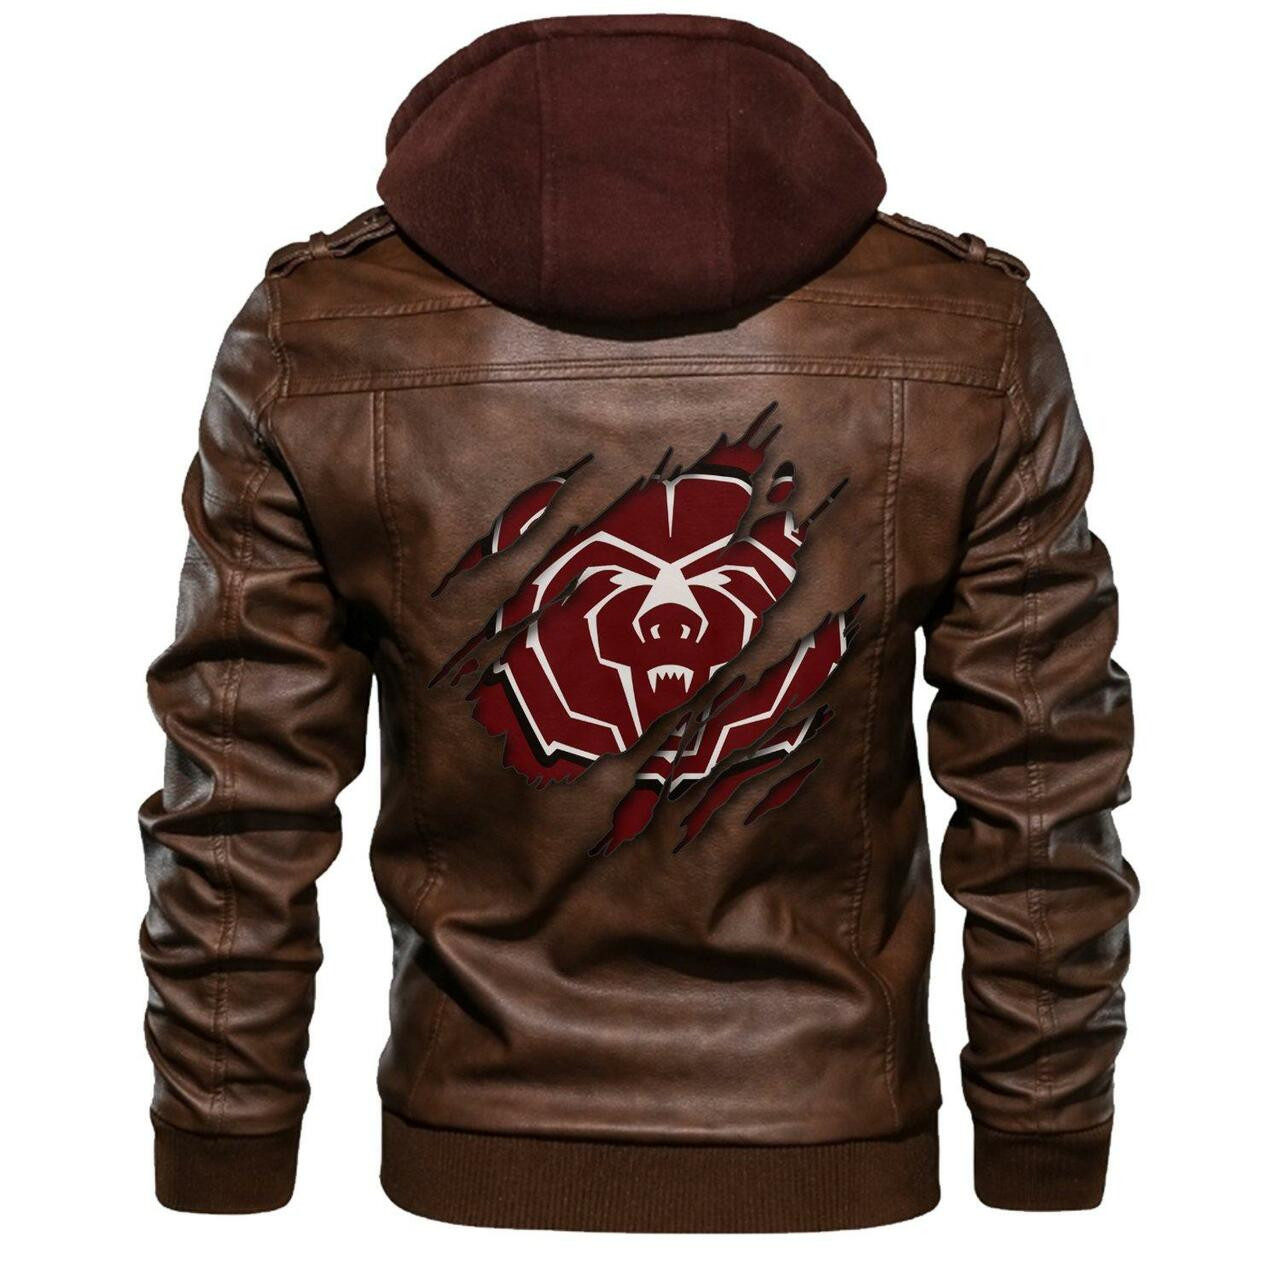 Check out and find the right leather jacket below 211